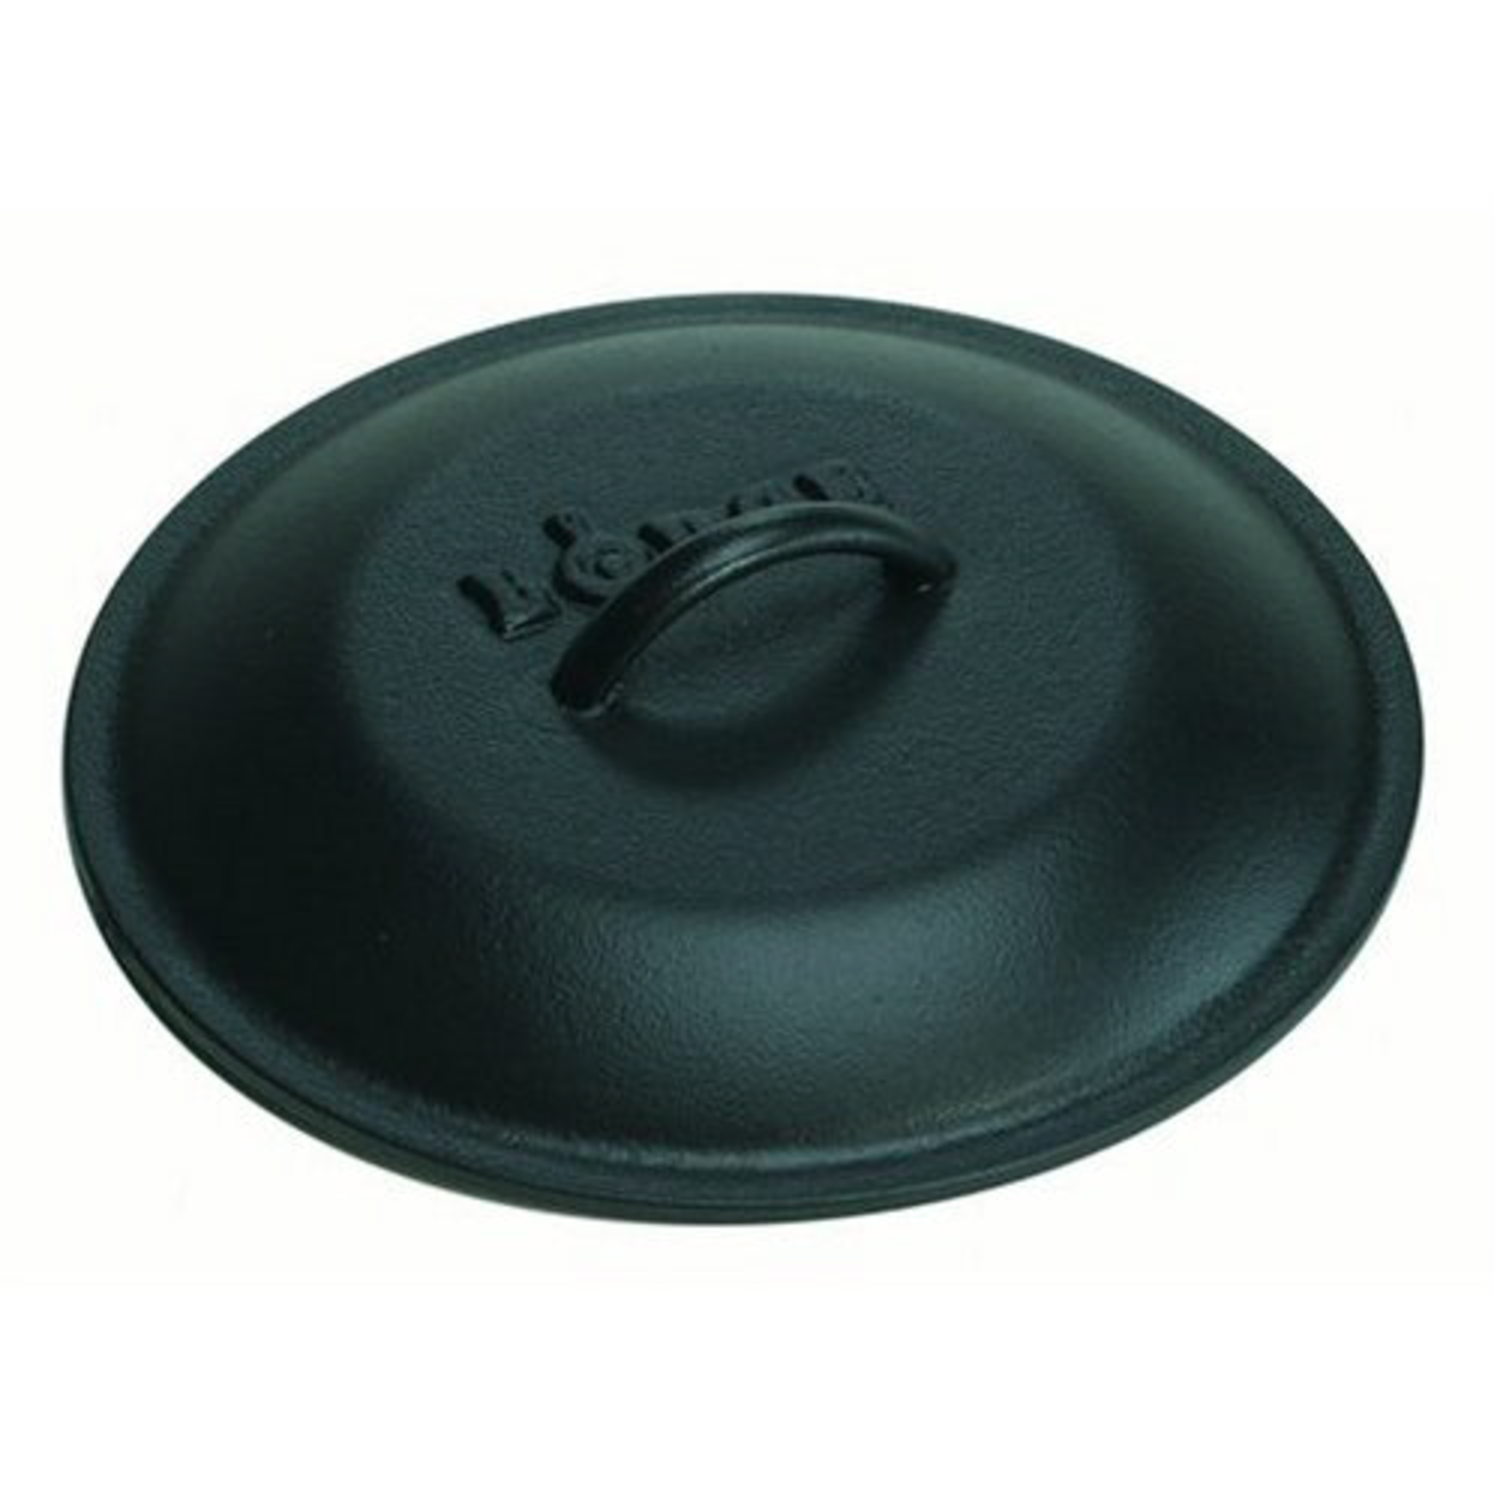 Lodge Cast Iron Skillet with Glass Lid - 10.25 - household items